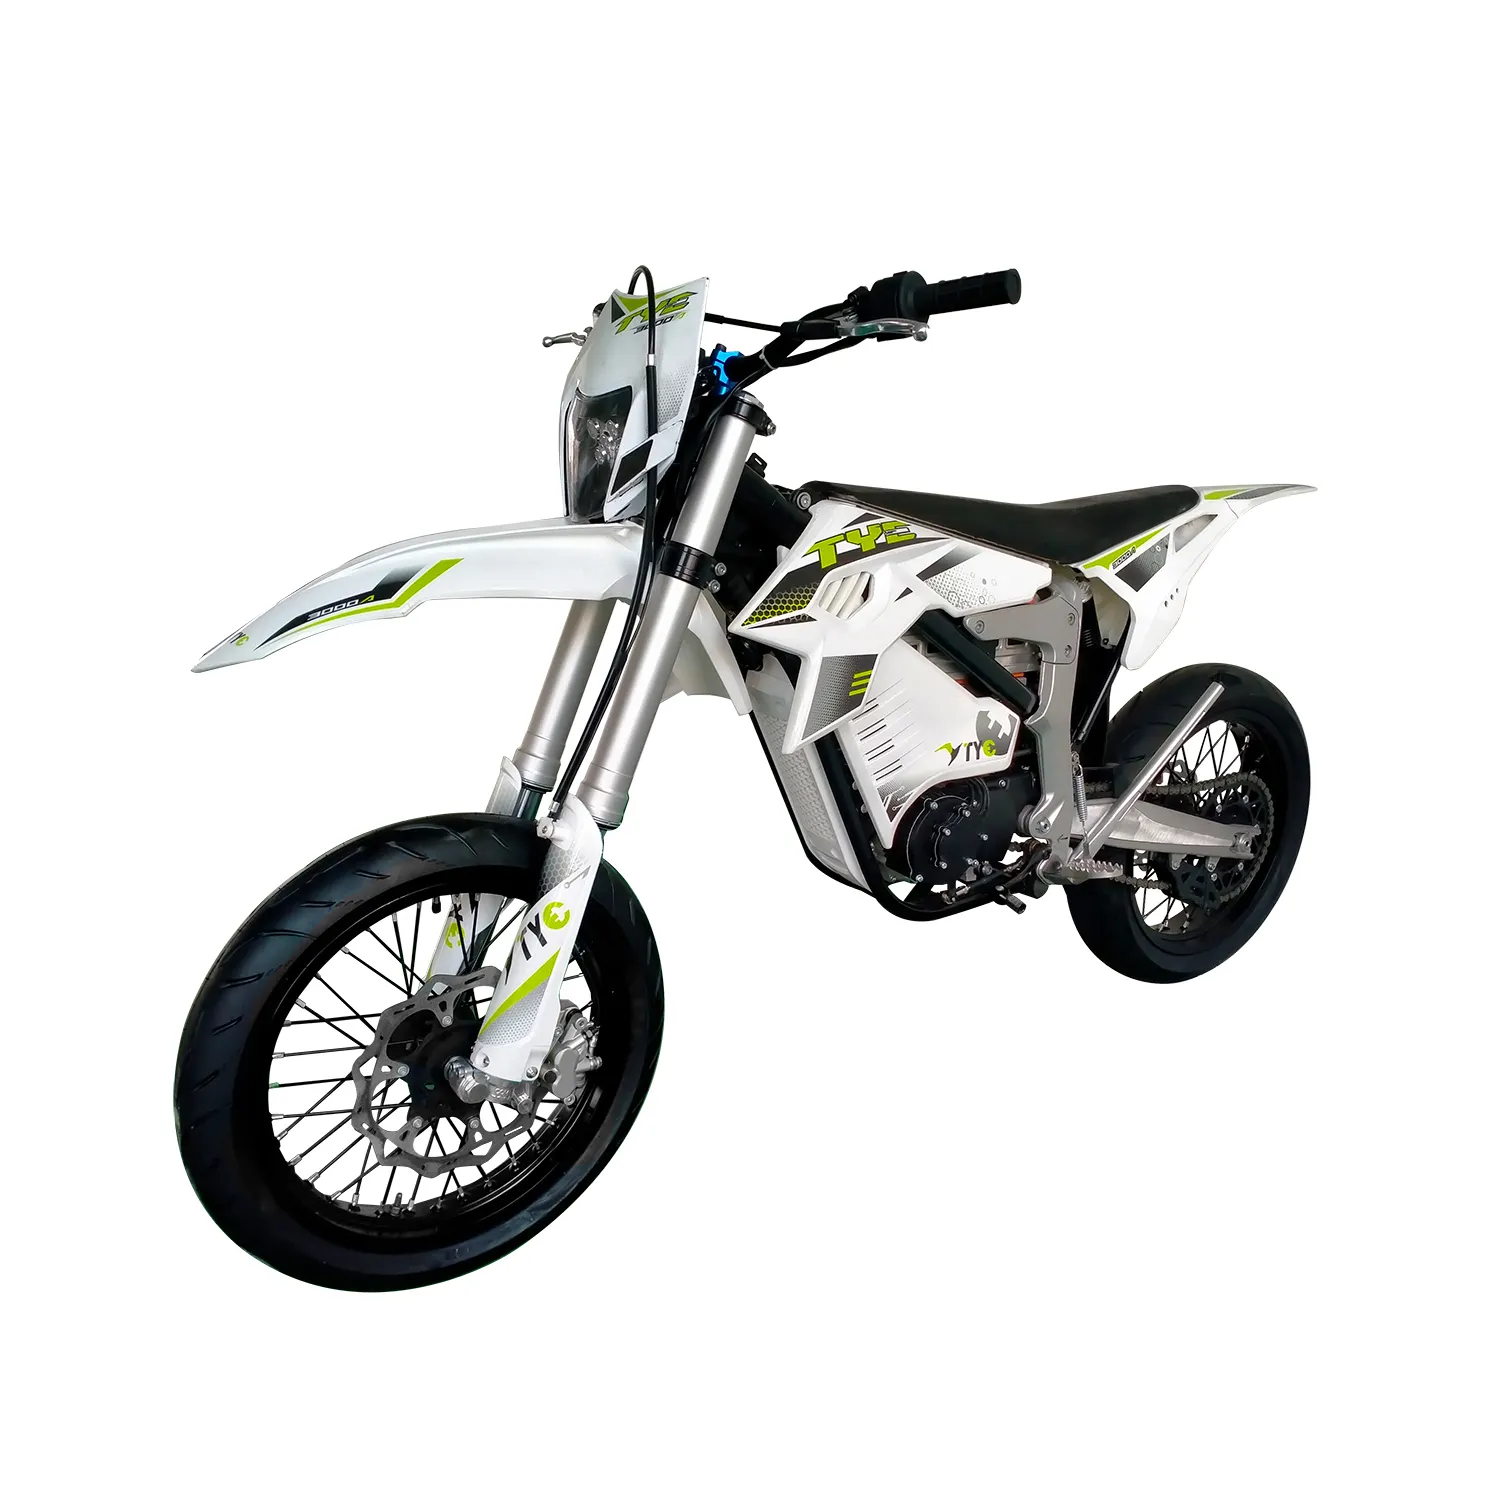 New Arrival 125km/h 150Km Range chinese electric motorcycle aluminum alloy with good quality